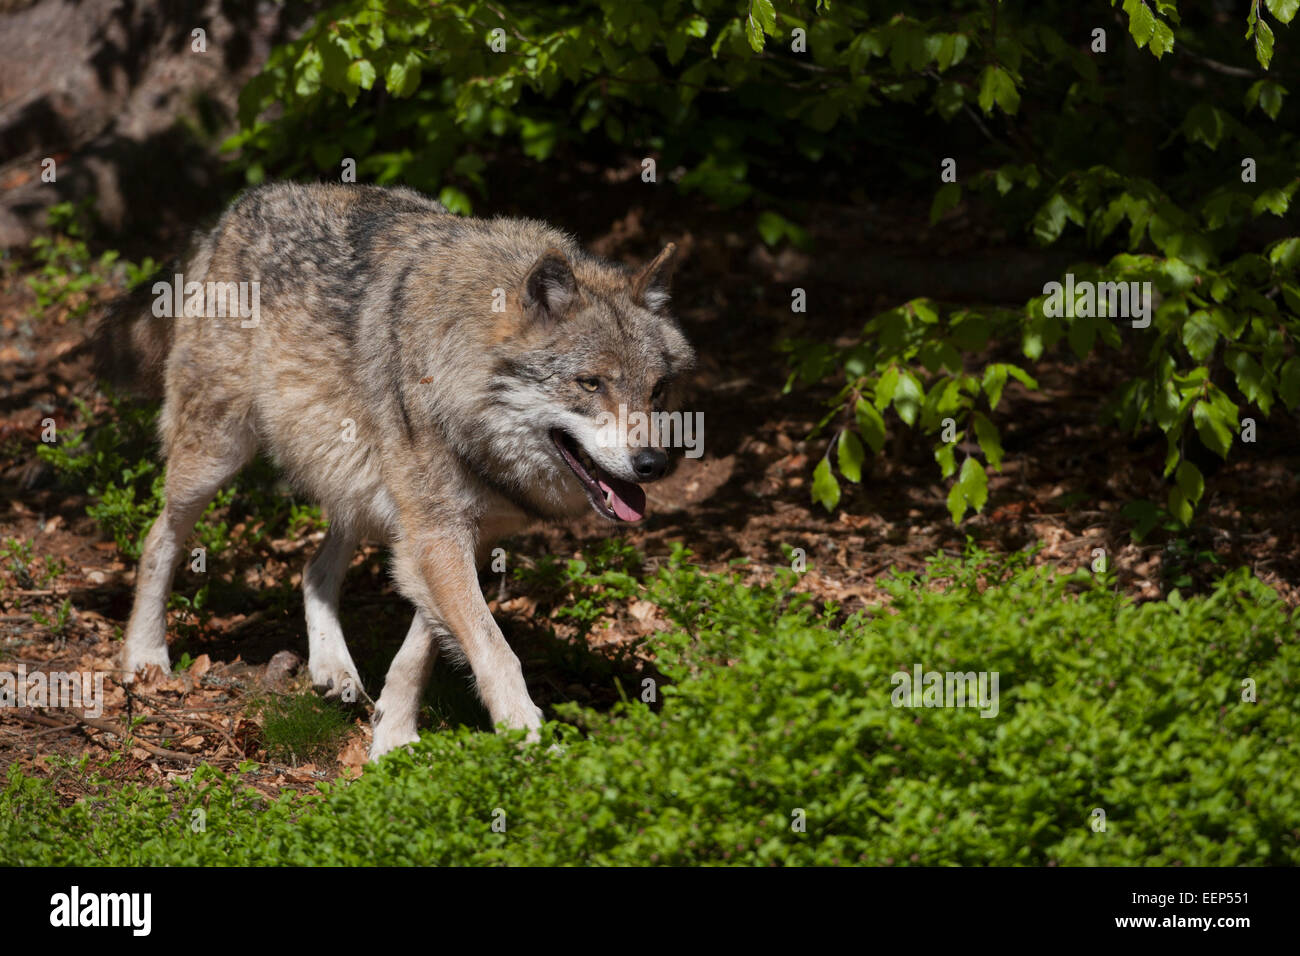 Wolf Canis lupus NP Bayerischer Wald Wolf Canis lupus NP Bavarian Forest Stock Photo